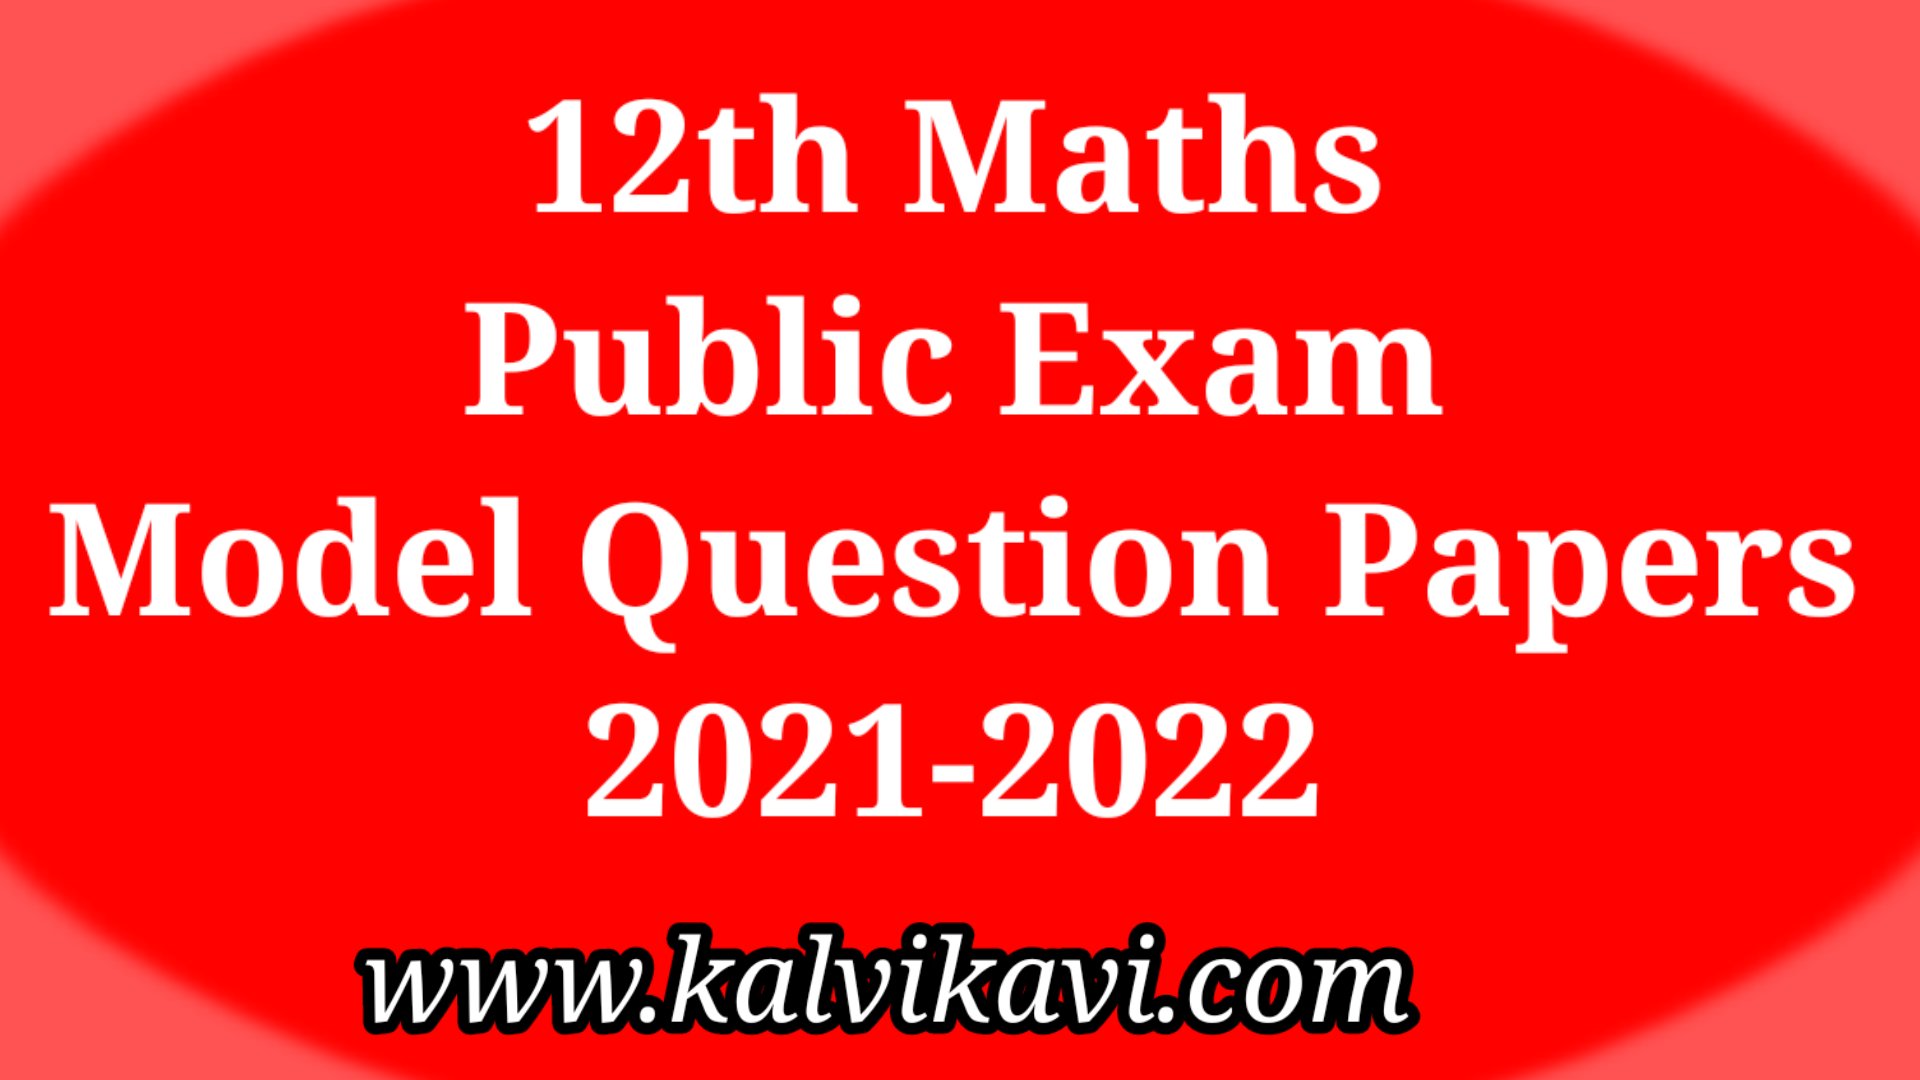 12th maths Public exam question papers.jpg